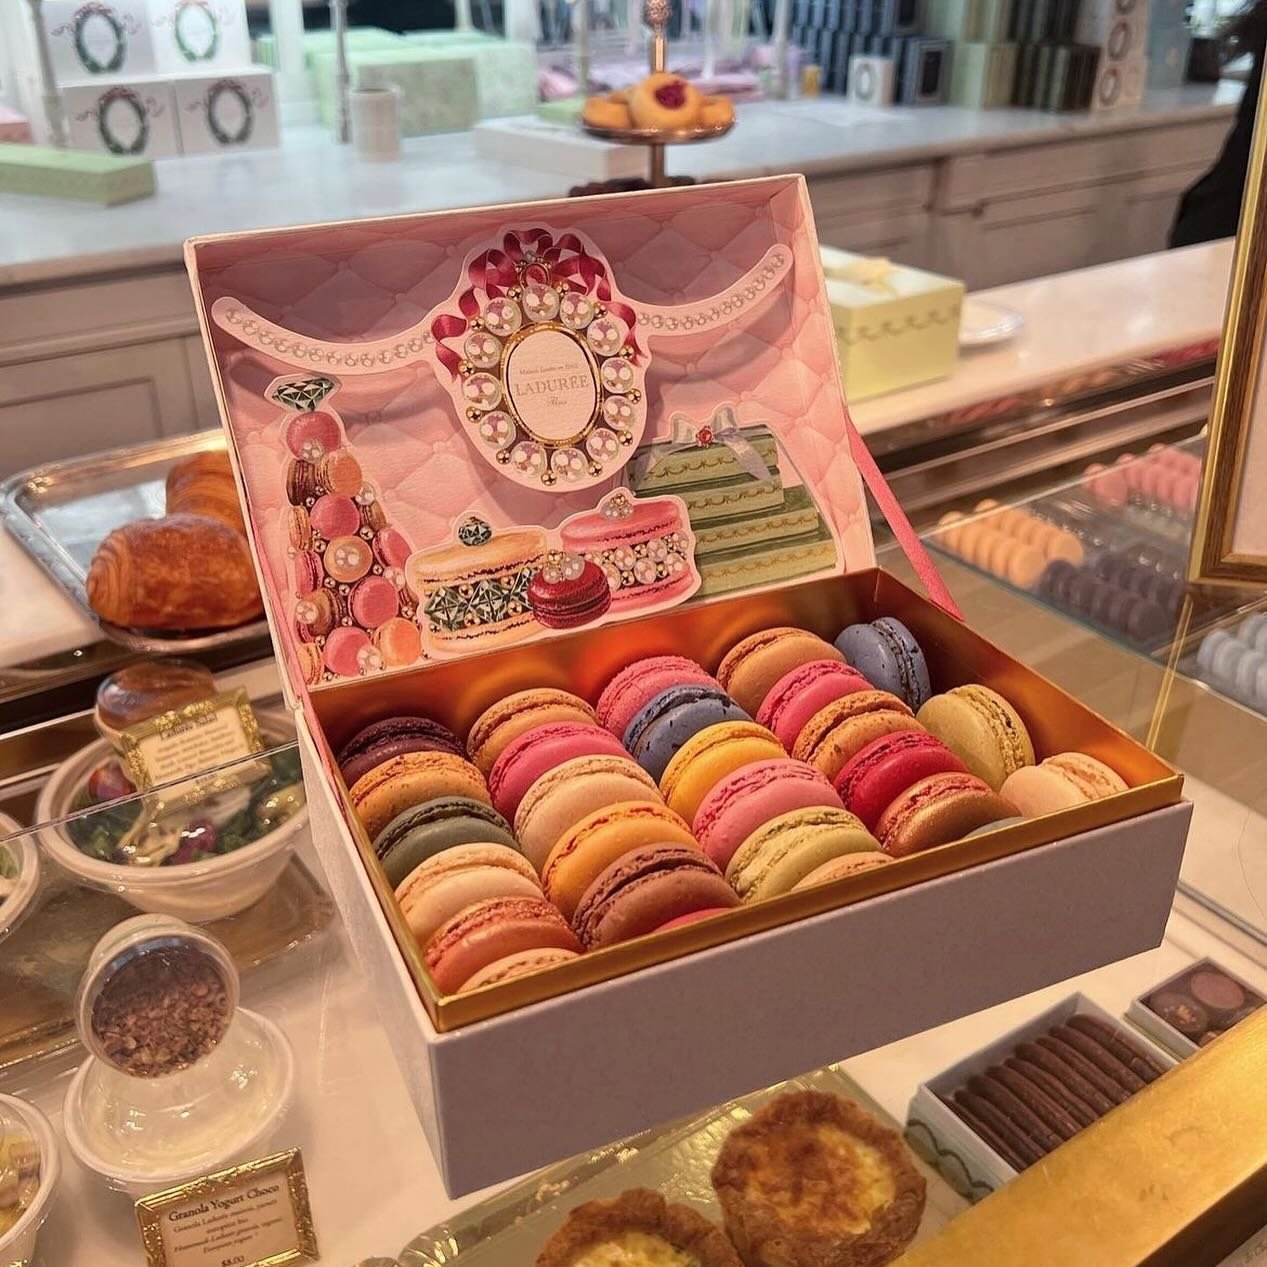 When I was in Paris many moons ago I fell in love with Ladur&eacute;e so anytime I&rsquo;m on Madison Ave, I treat myself ❤️ yesterdays dress shopping trip was the perfect time to introduce my clients to these yummy treats